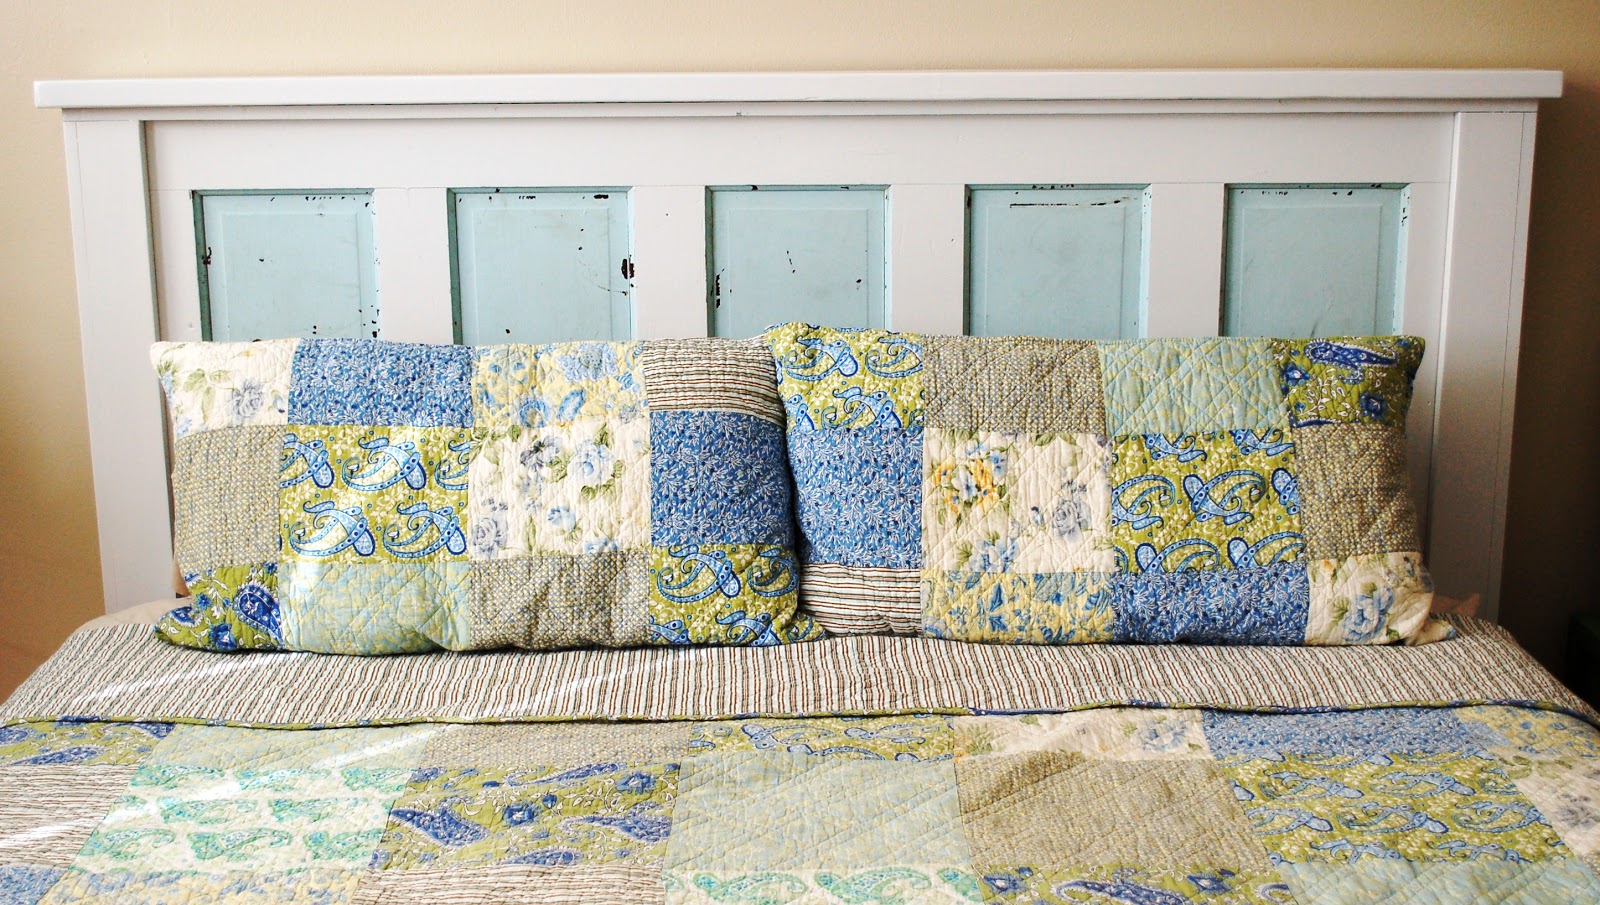 Make a headboard out of a repurposed door.